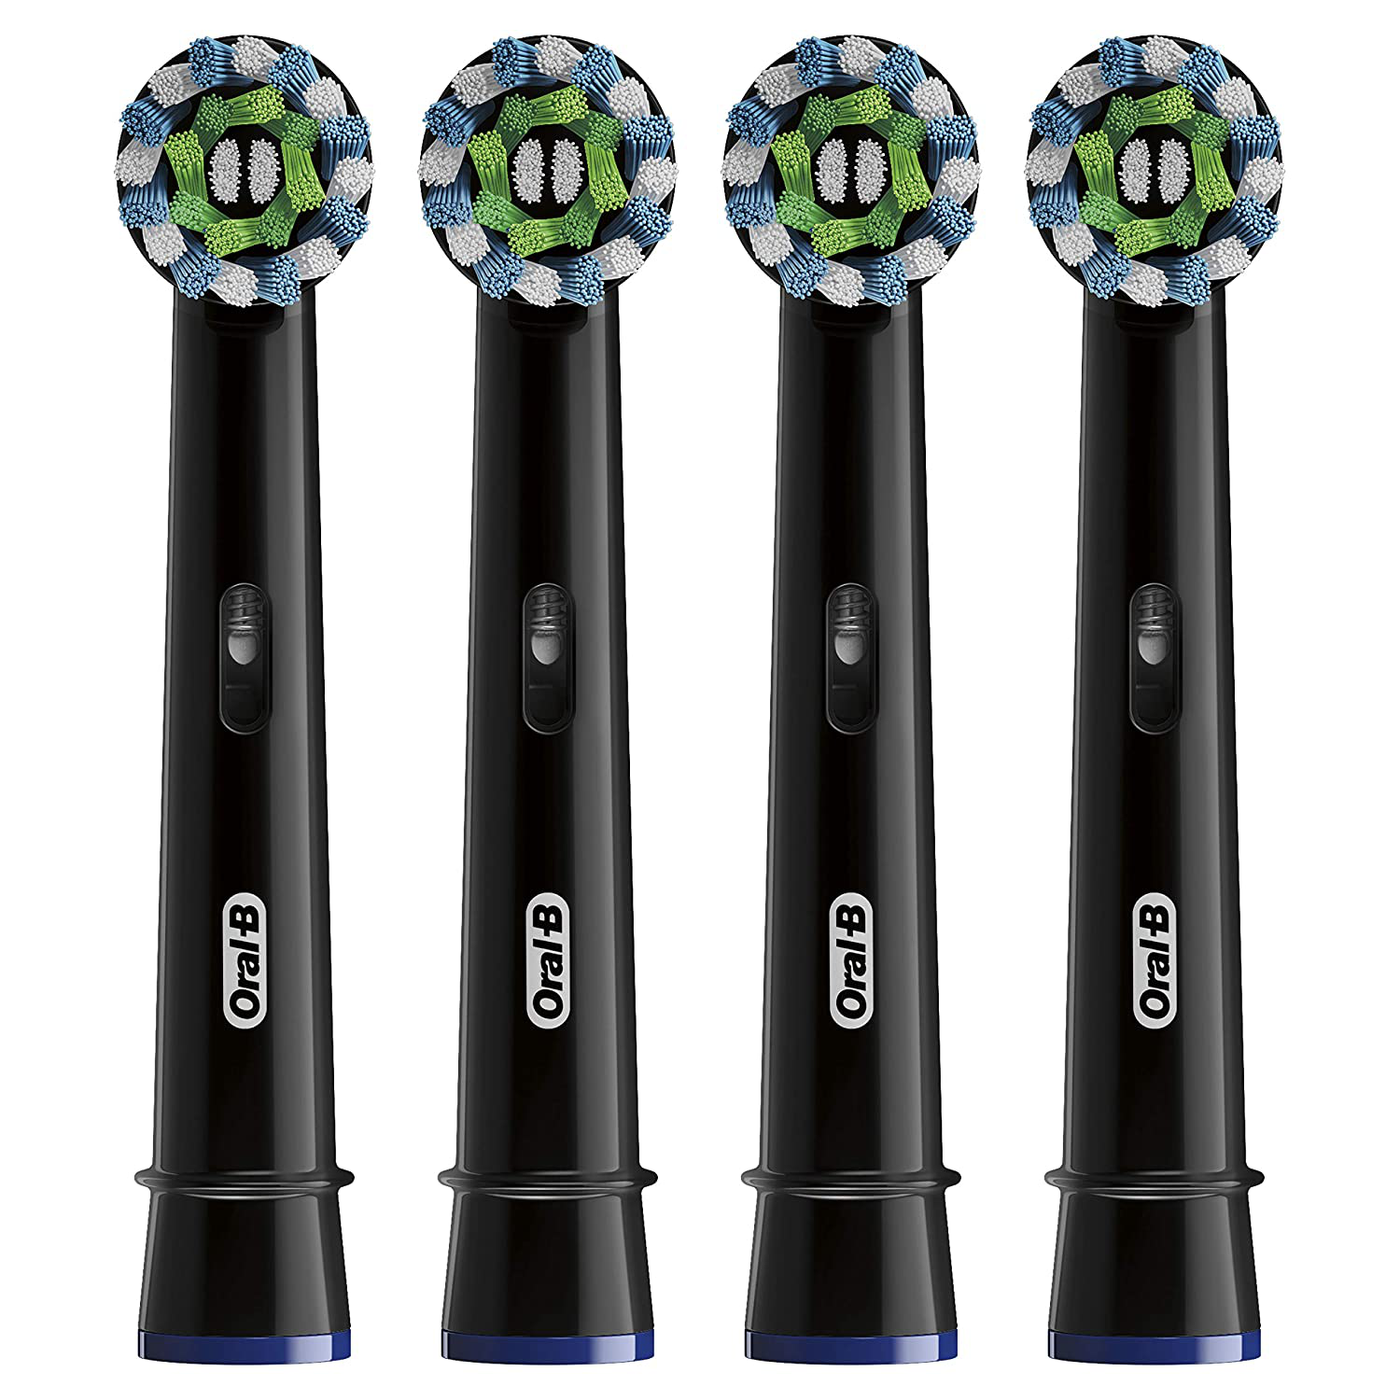 Oral-b Crossaction Electric Toothbrush Replacement Brush Head Refills, Black, 4 Count